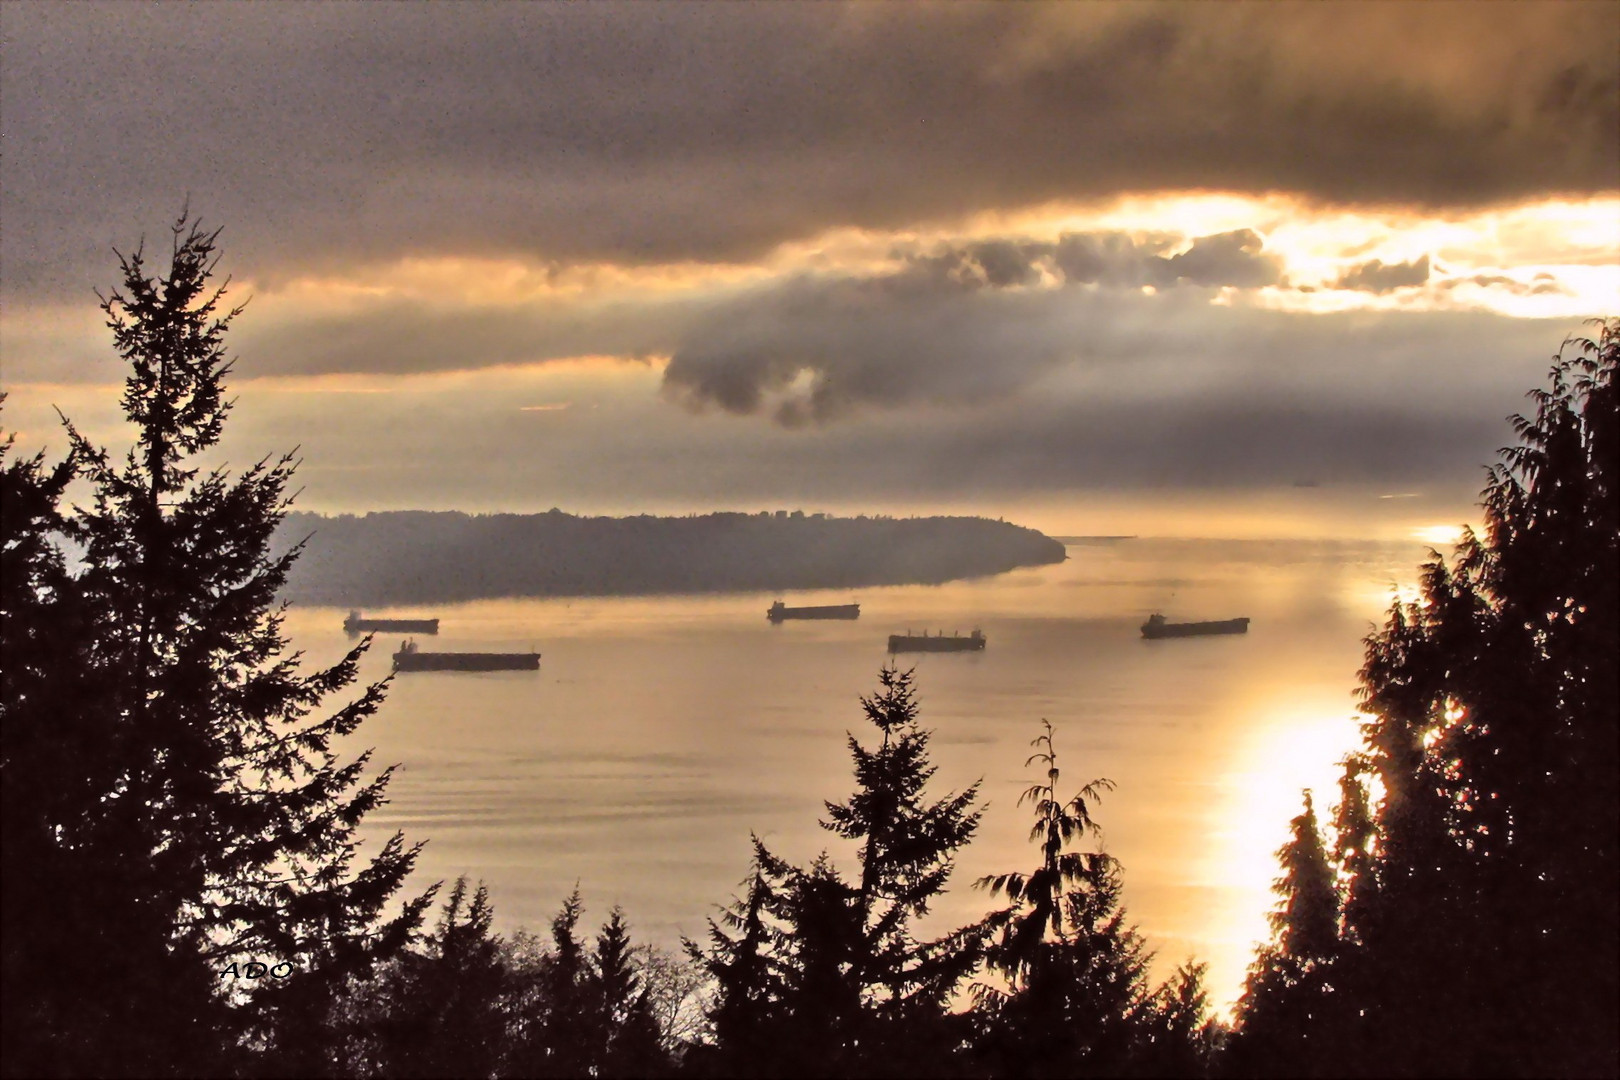 Evening over the Burrard Inlet